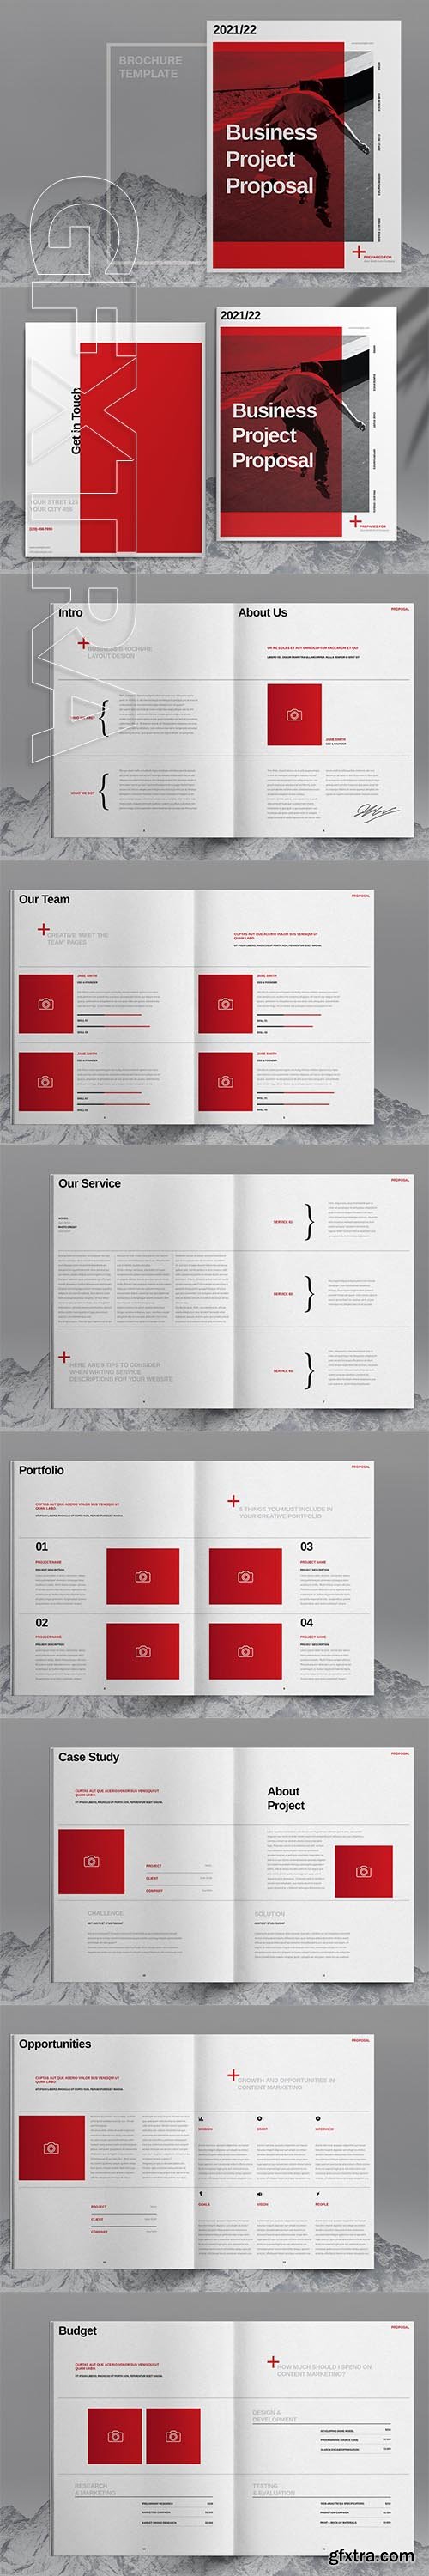 CreativeMarket - Business Project Proposal Template 6007164